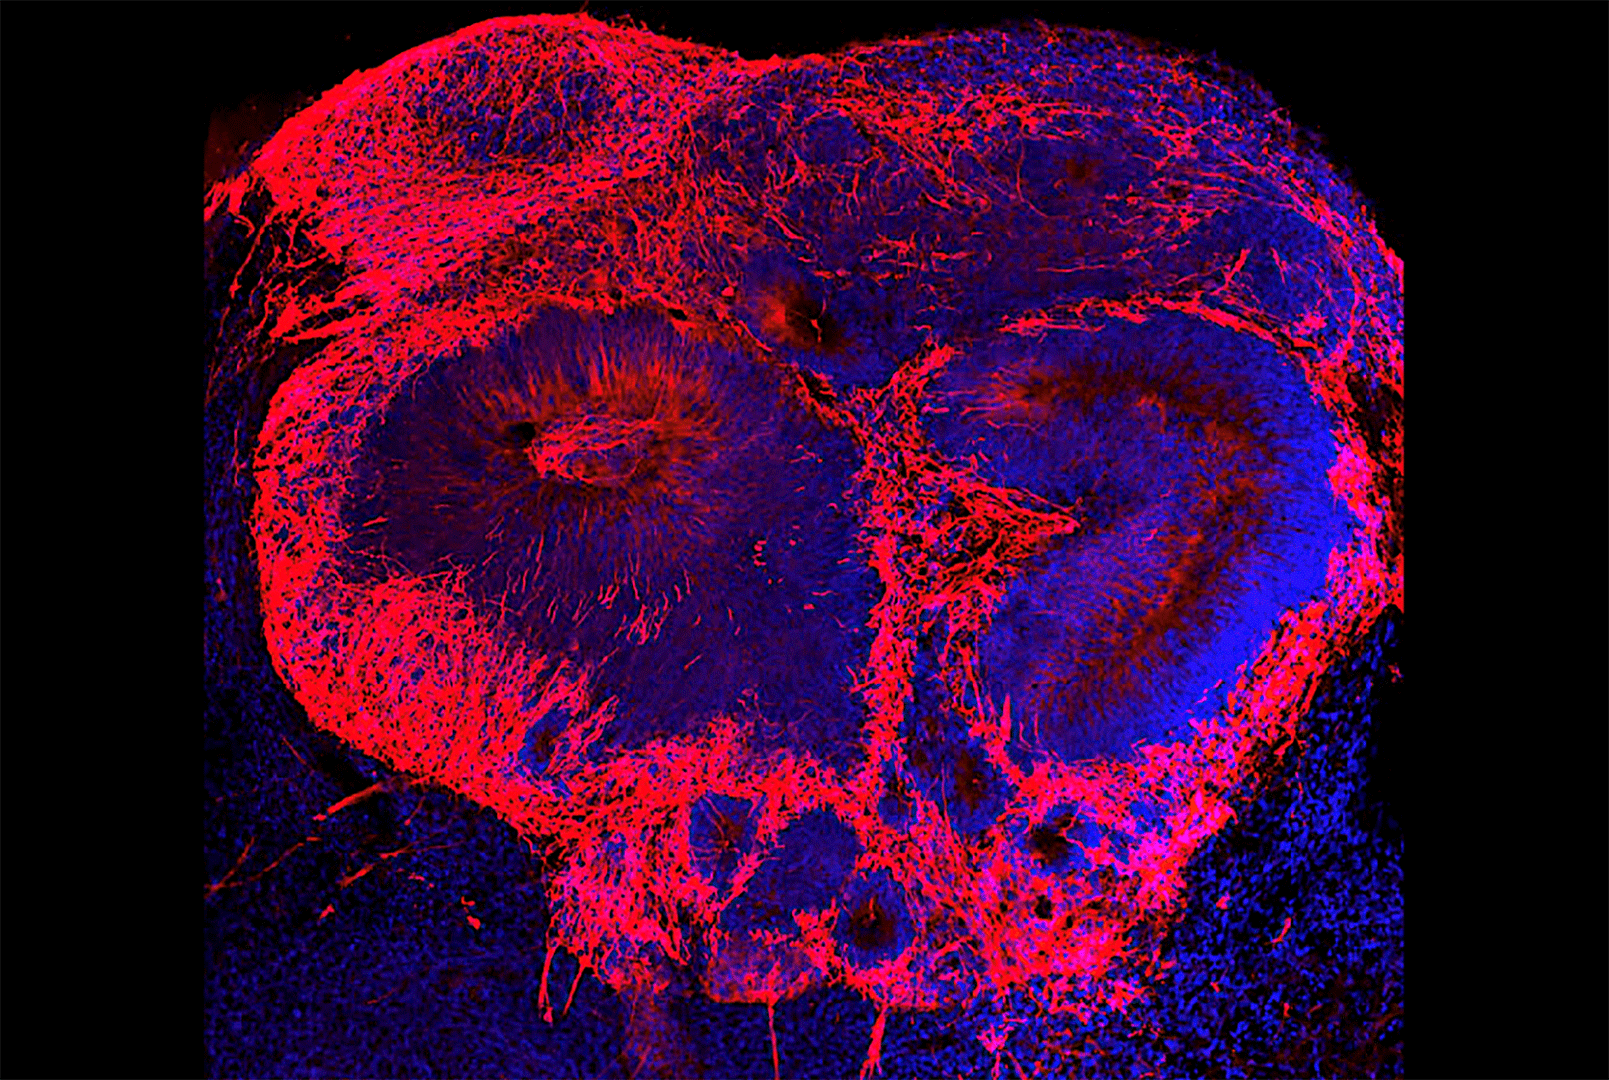 Increasing levels of a potential disease factor results in additional brain cells (red) in a schizophrenia brain organoid. Image courtesy of Dr. Michael Notaras.